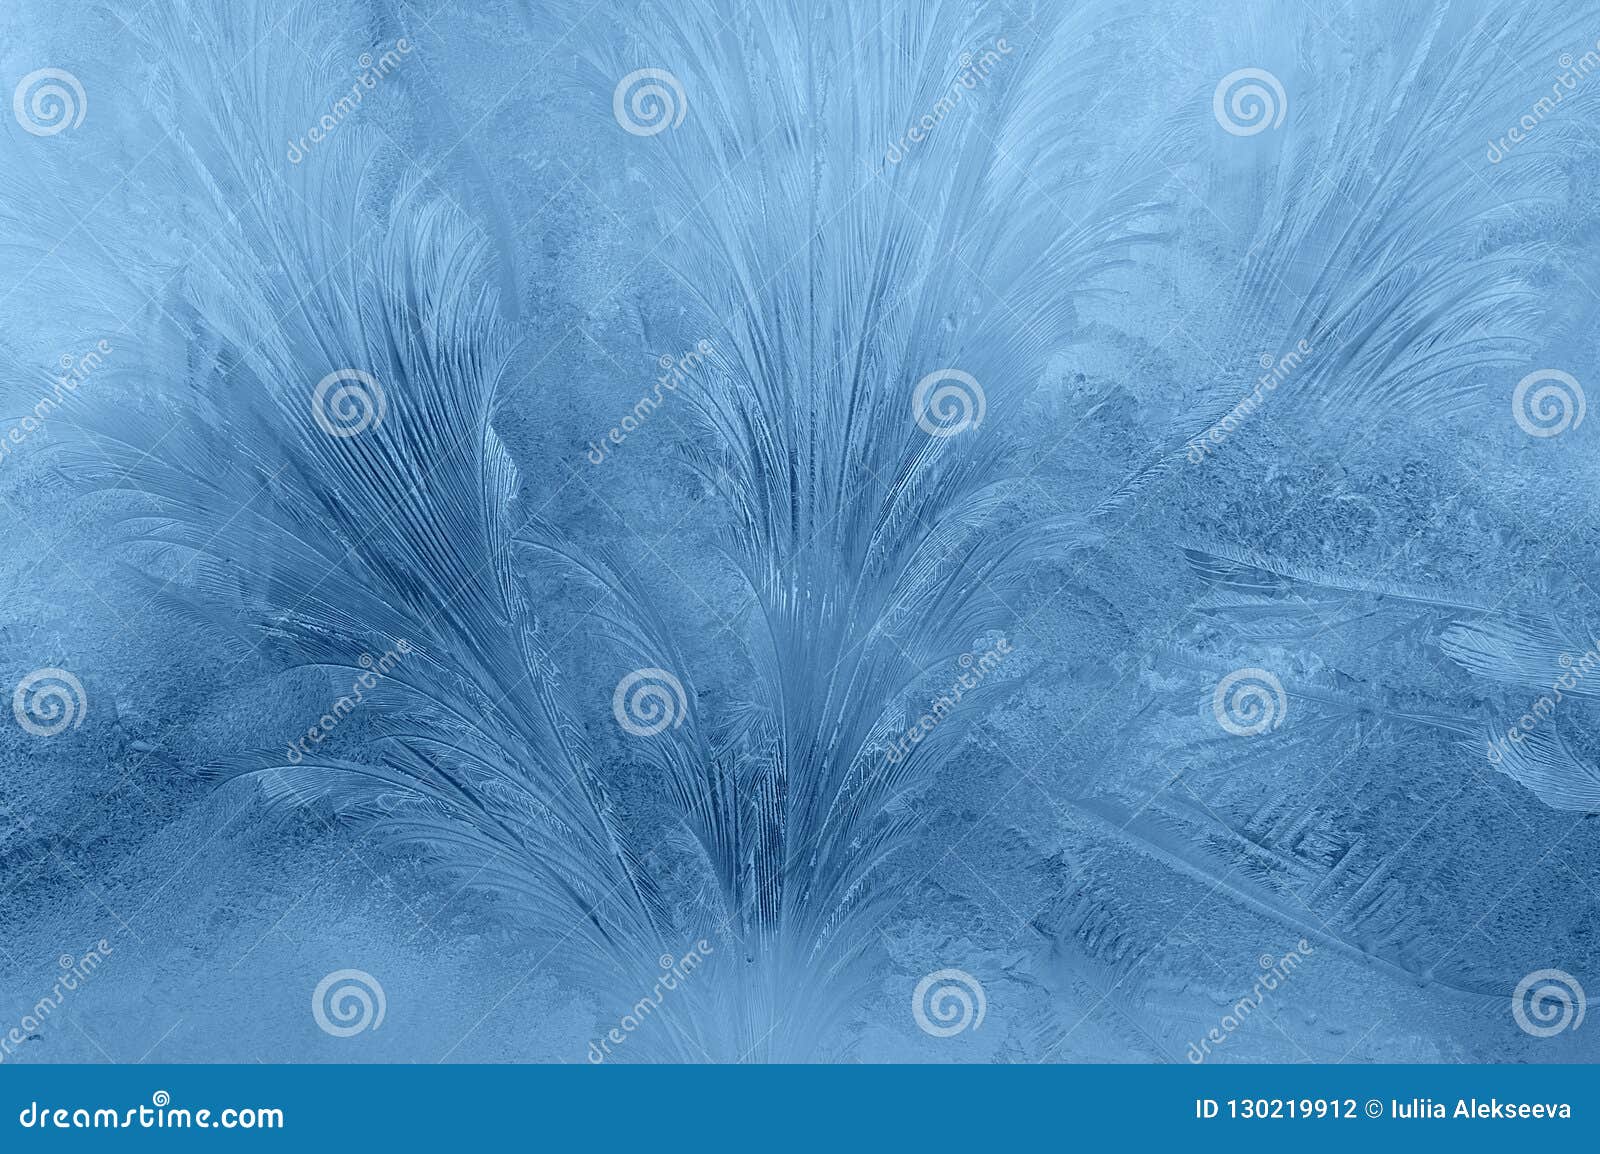 abstraction of frosty patterns on the window